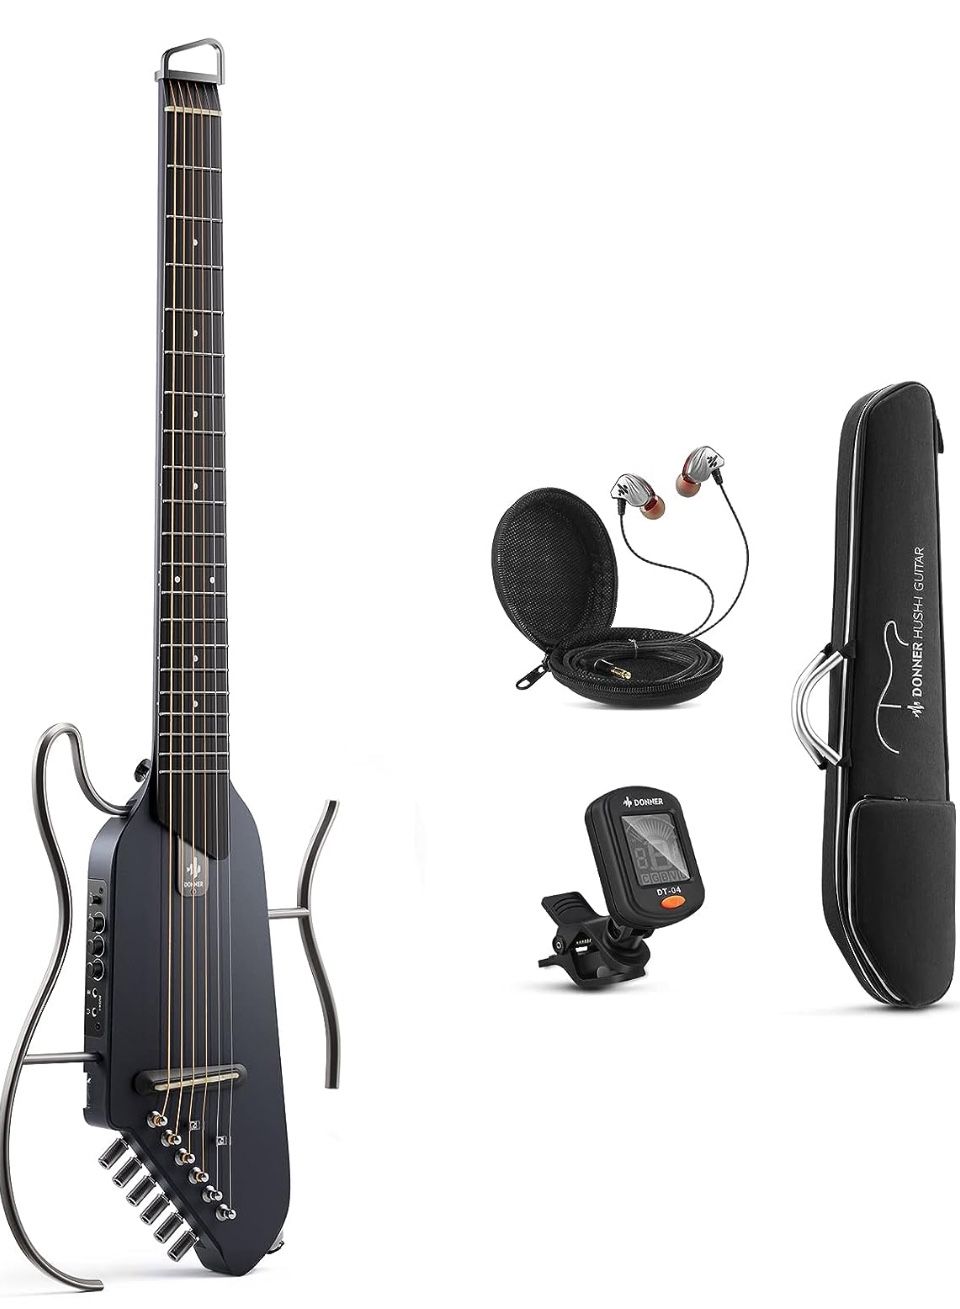 Donner HUSH-I Guitar For Travel - Portable Ultra-Light and Quiet Performance Headless Acoustic-Electric Guitar, Maple Body with Removable Frames, Gig 